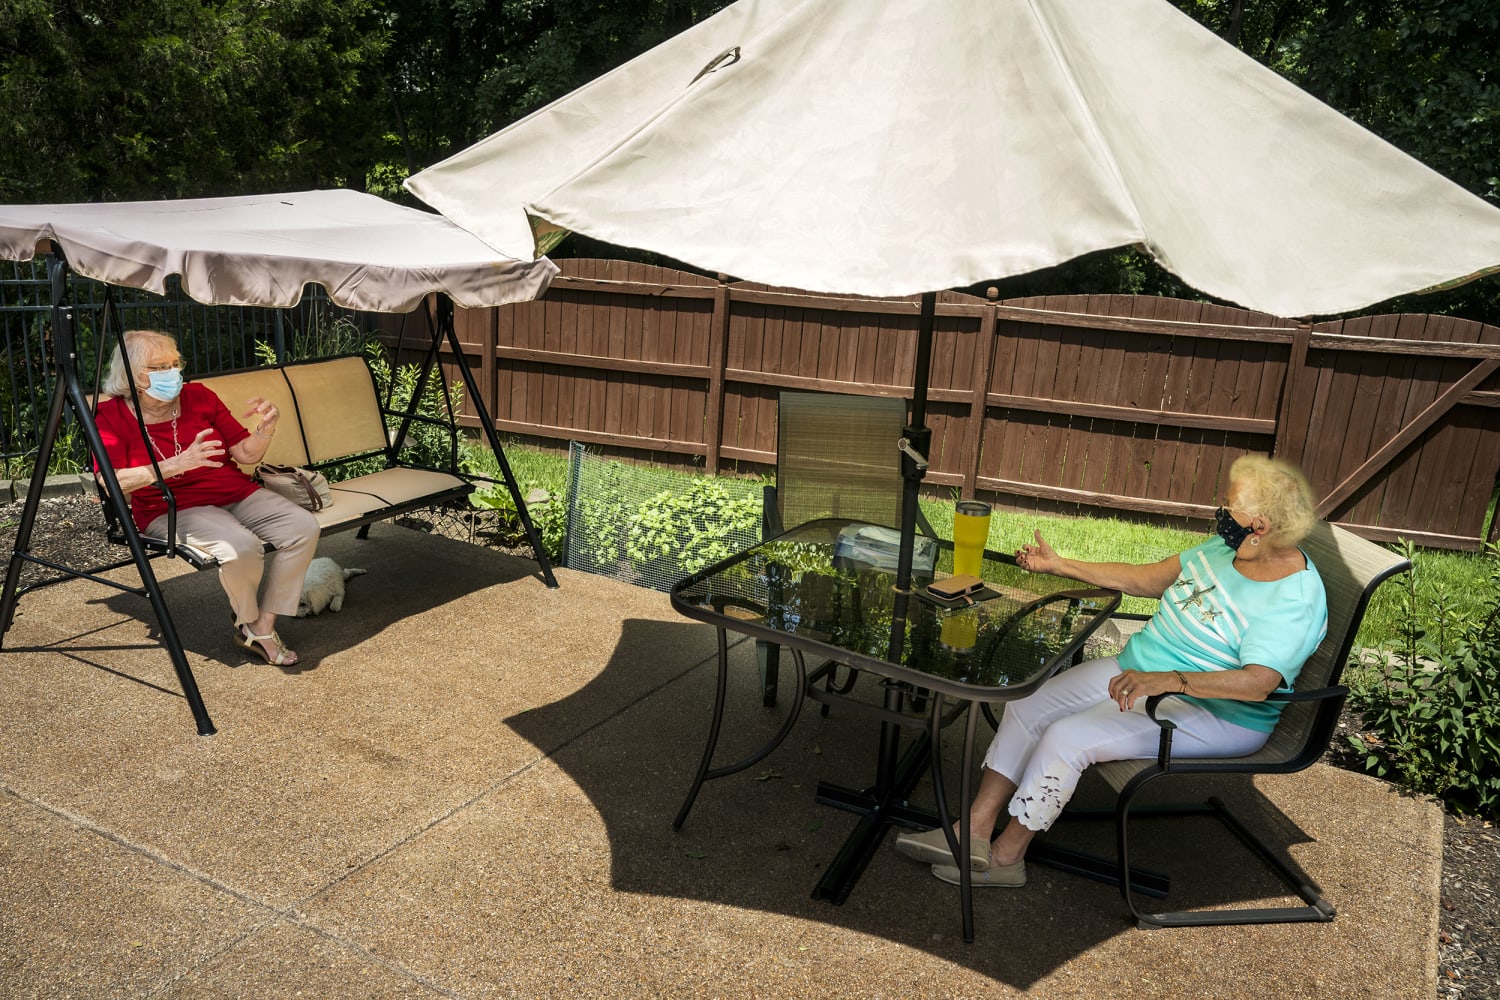 5 Best Canopy Tents For Outdoor Gatherings In 2021 - Outdoor Winter Patio Tents